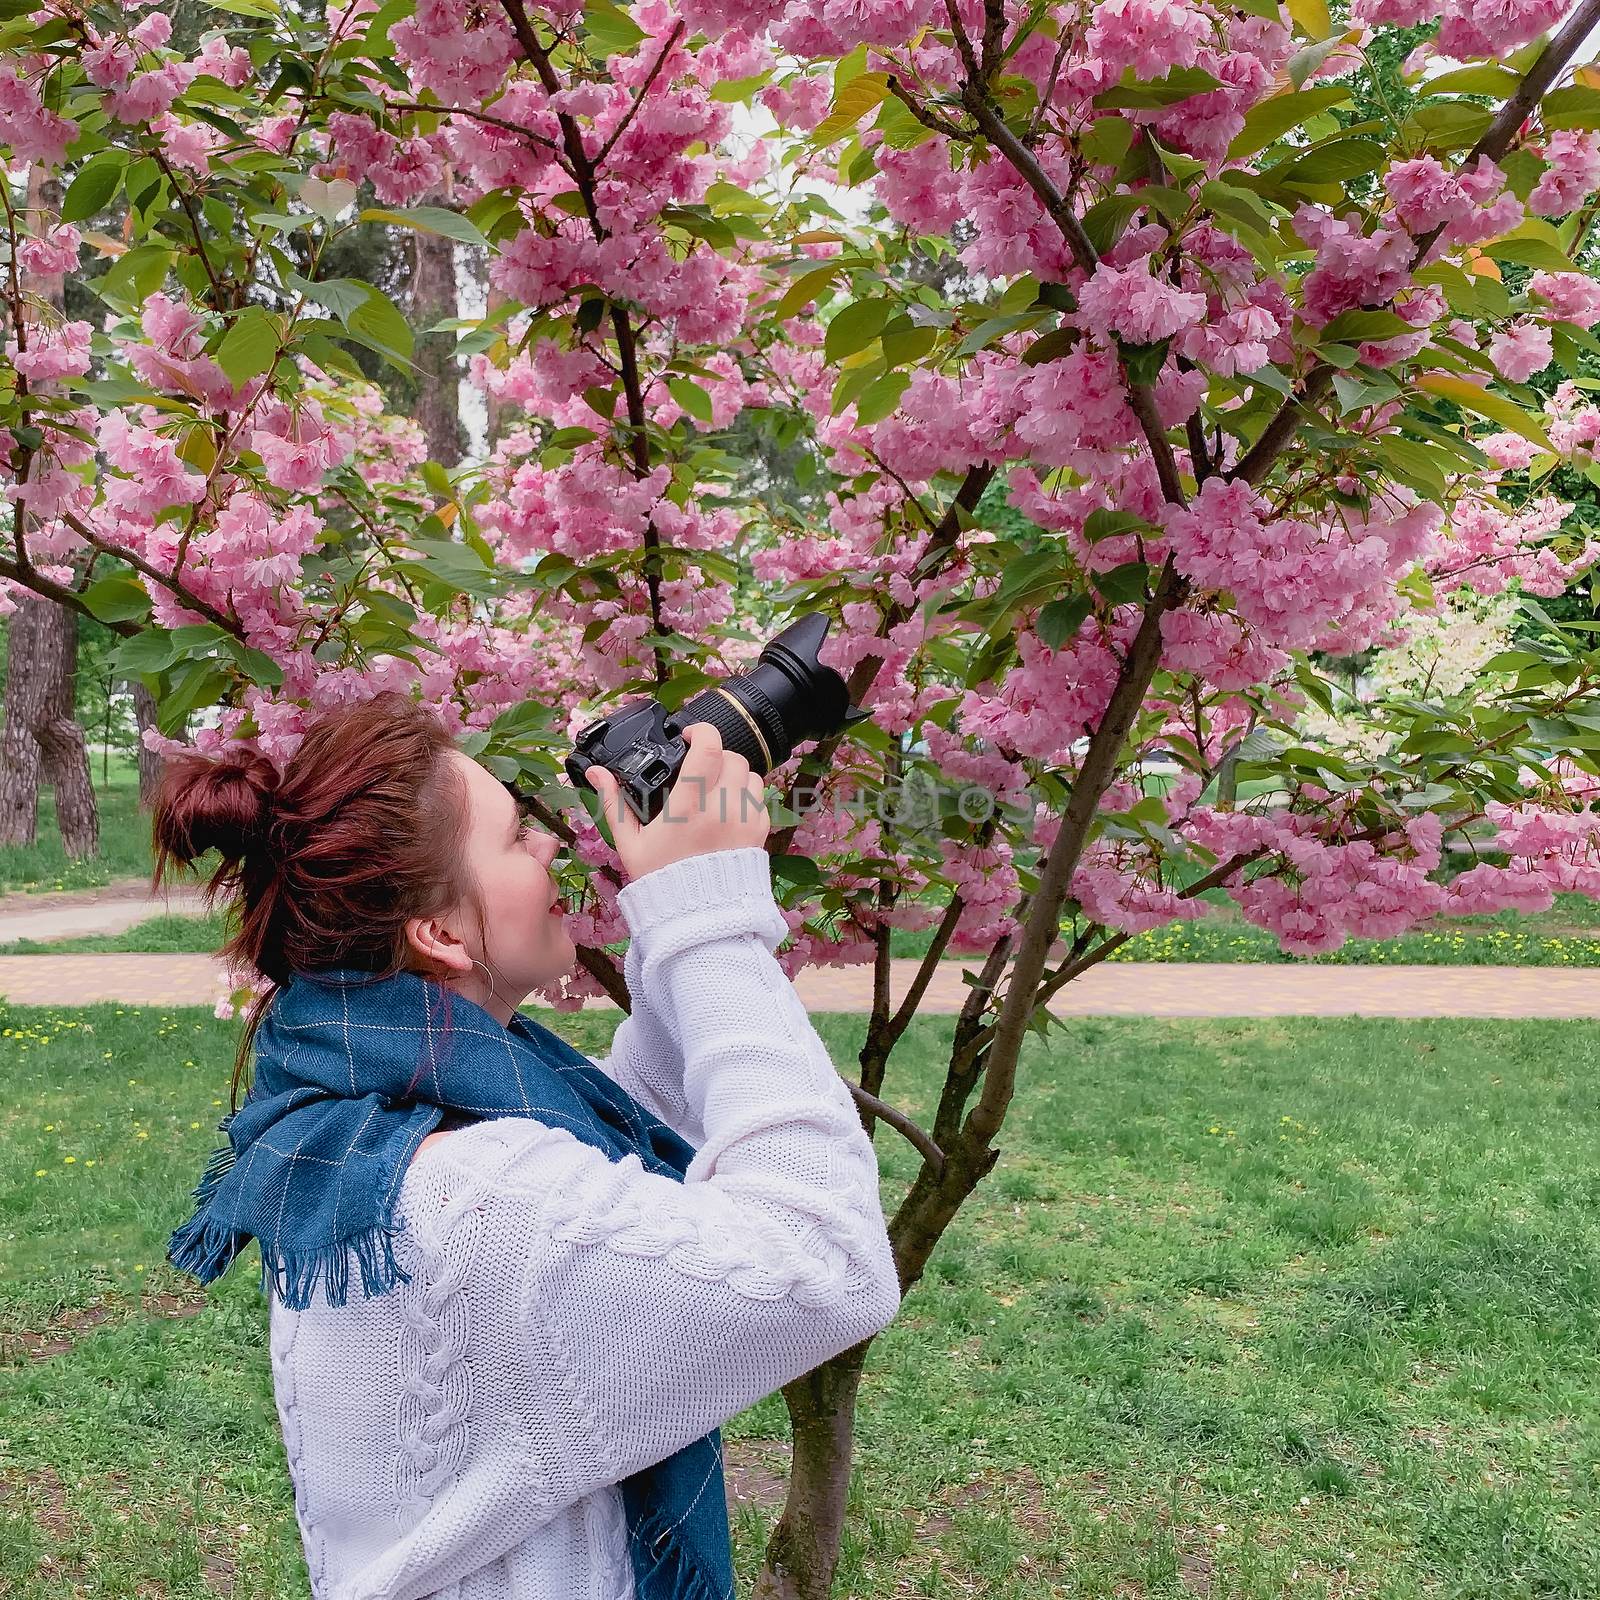 young happy smiling red-haired woman with a white sweater and blue scarf takes a picture with a flowering pink sakura tree in a park in the city of Kiev, Ukraine by Tanacha